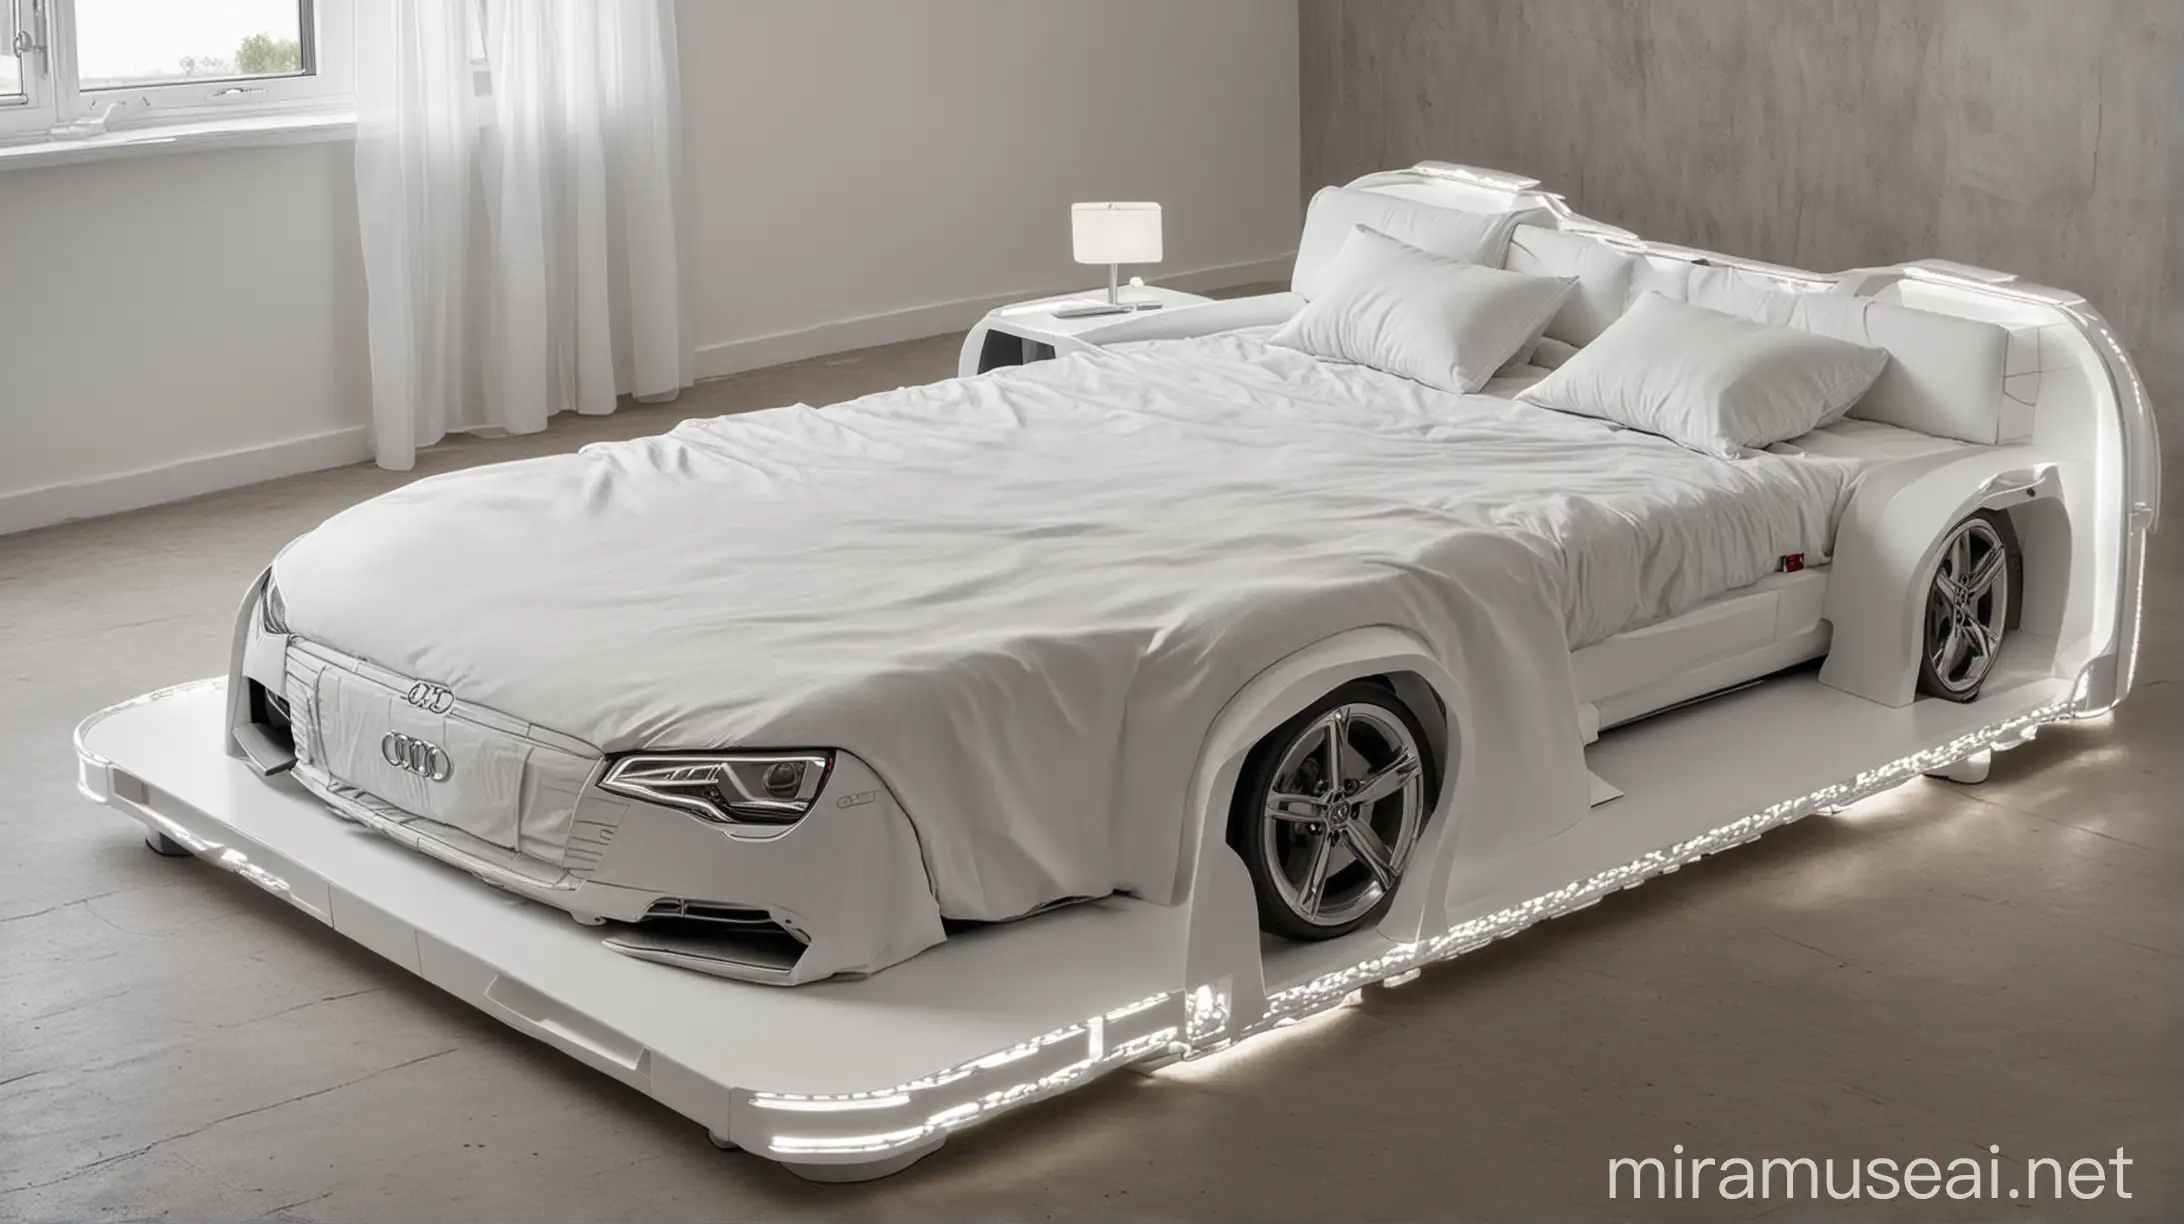 Luxurious Audi Car Double Bed